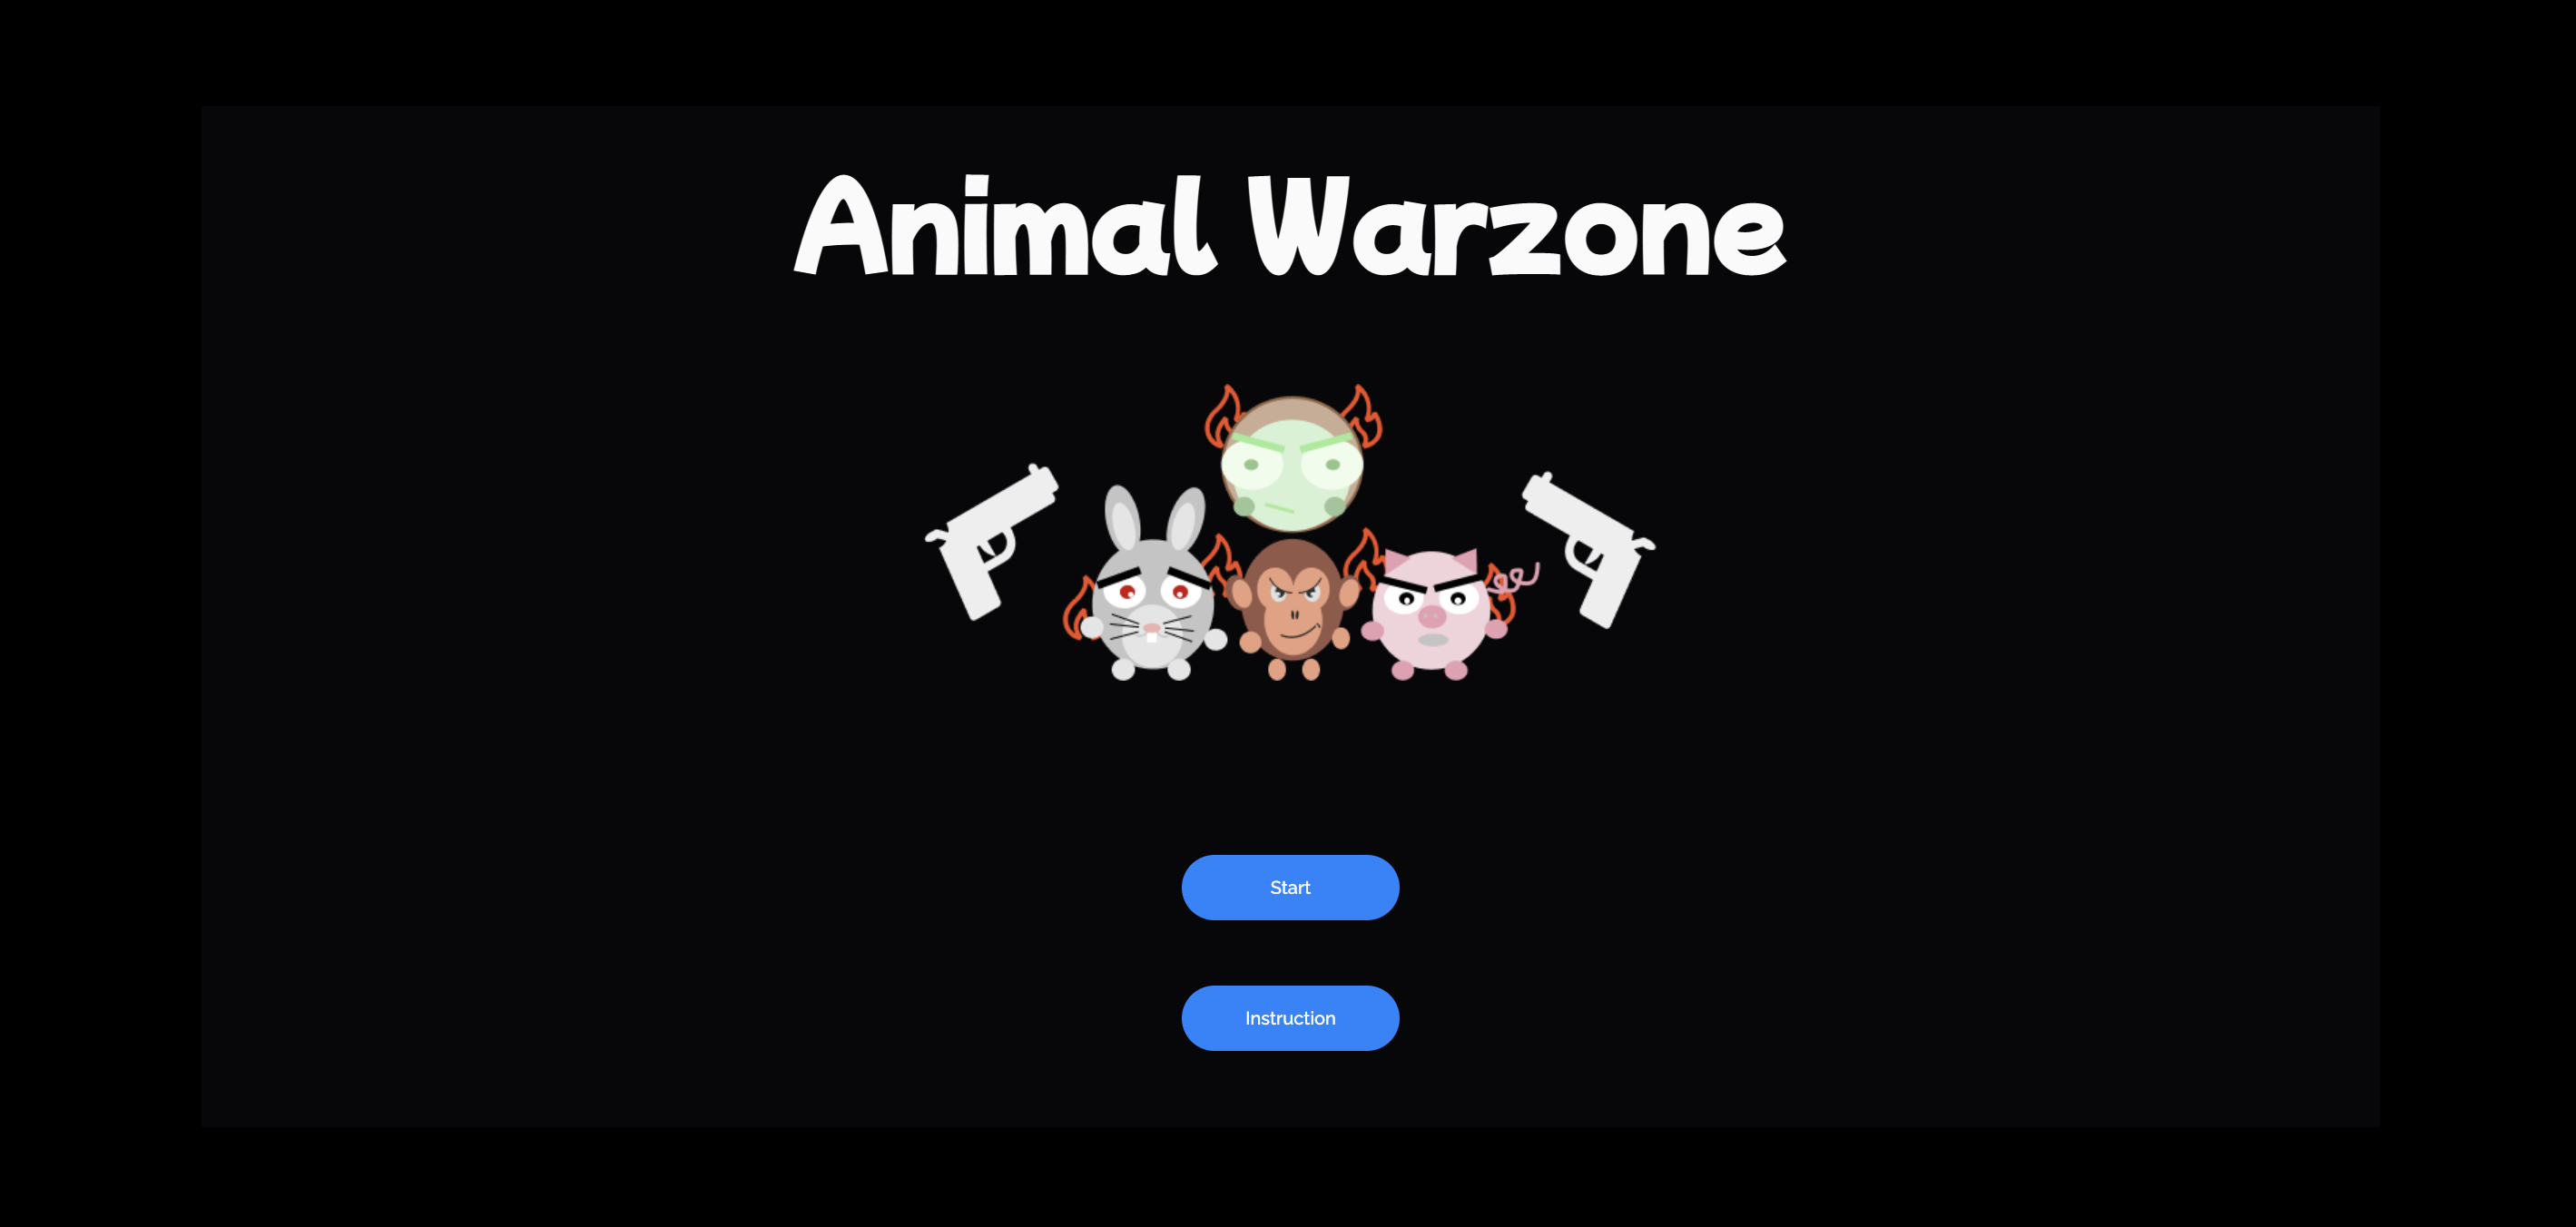  Animal Warzone - a game made in typescript and p5